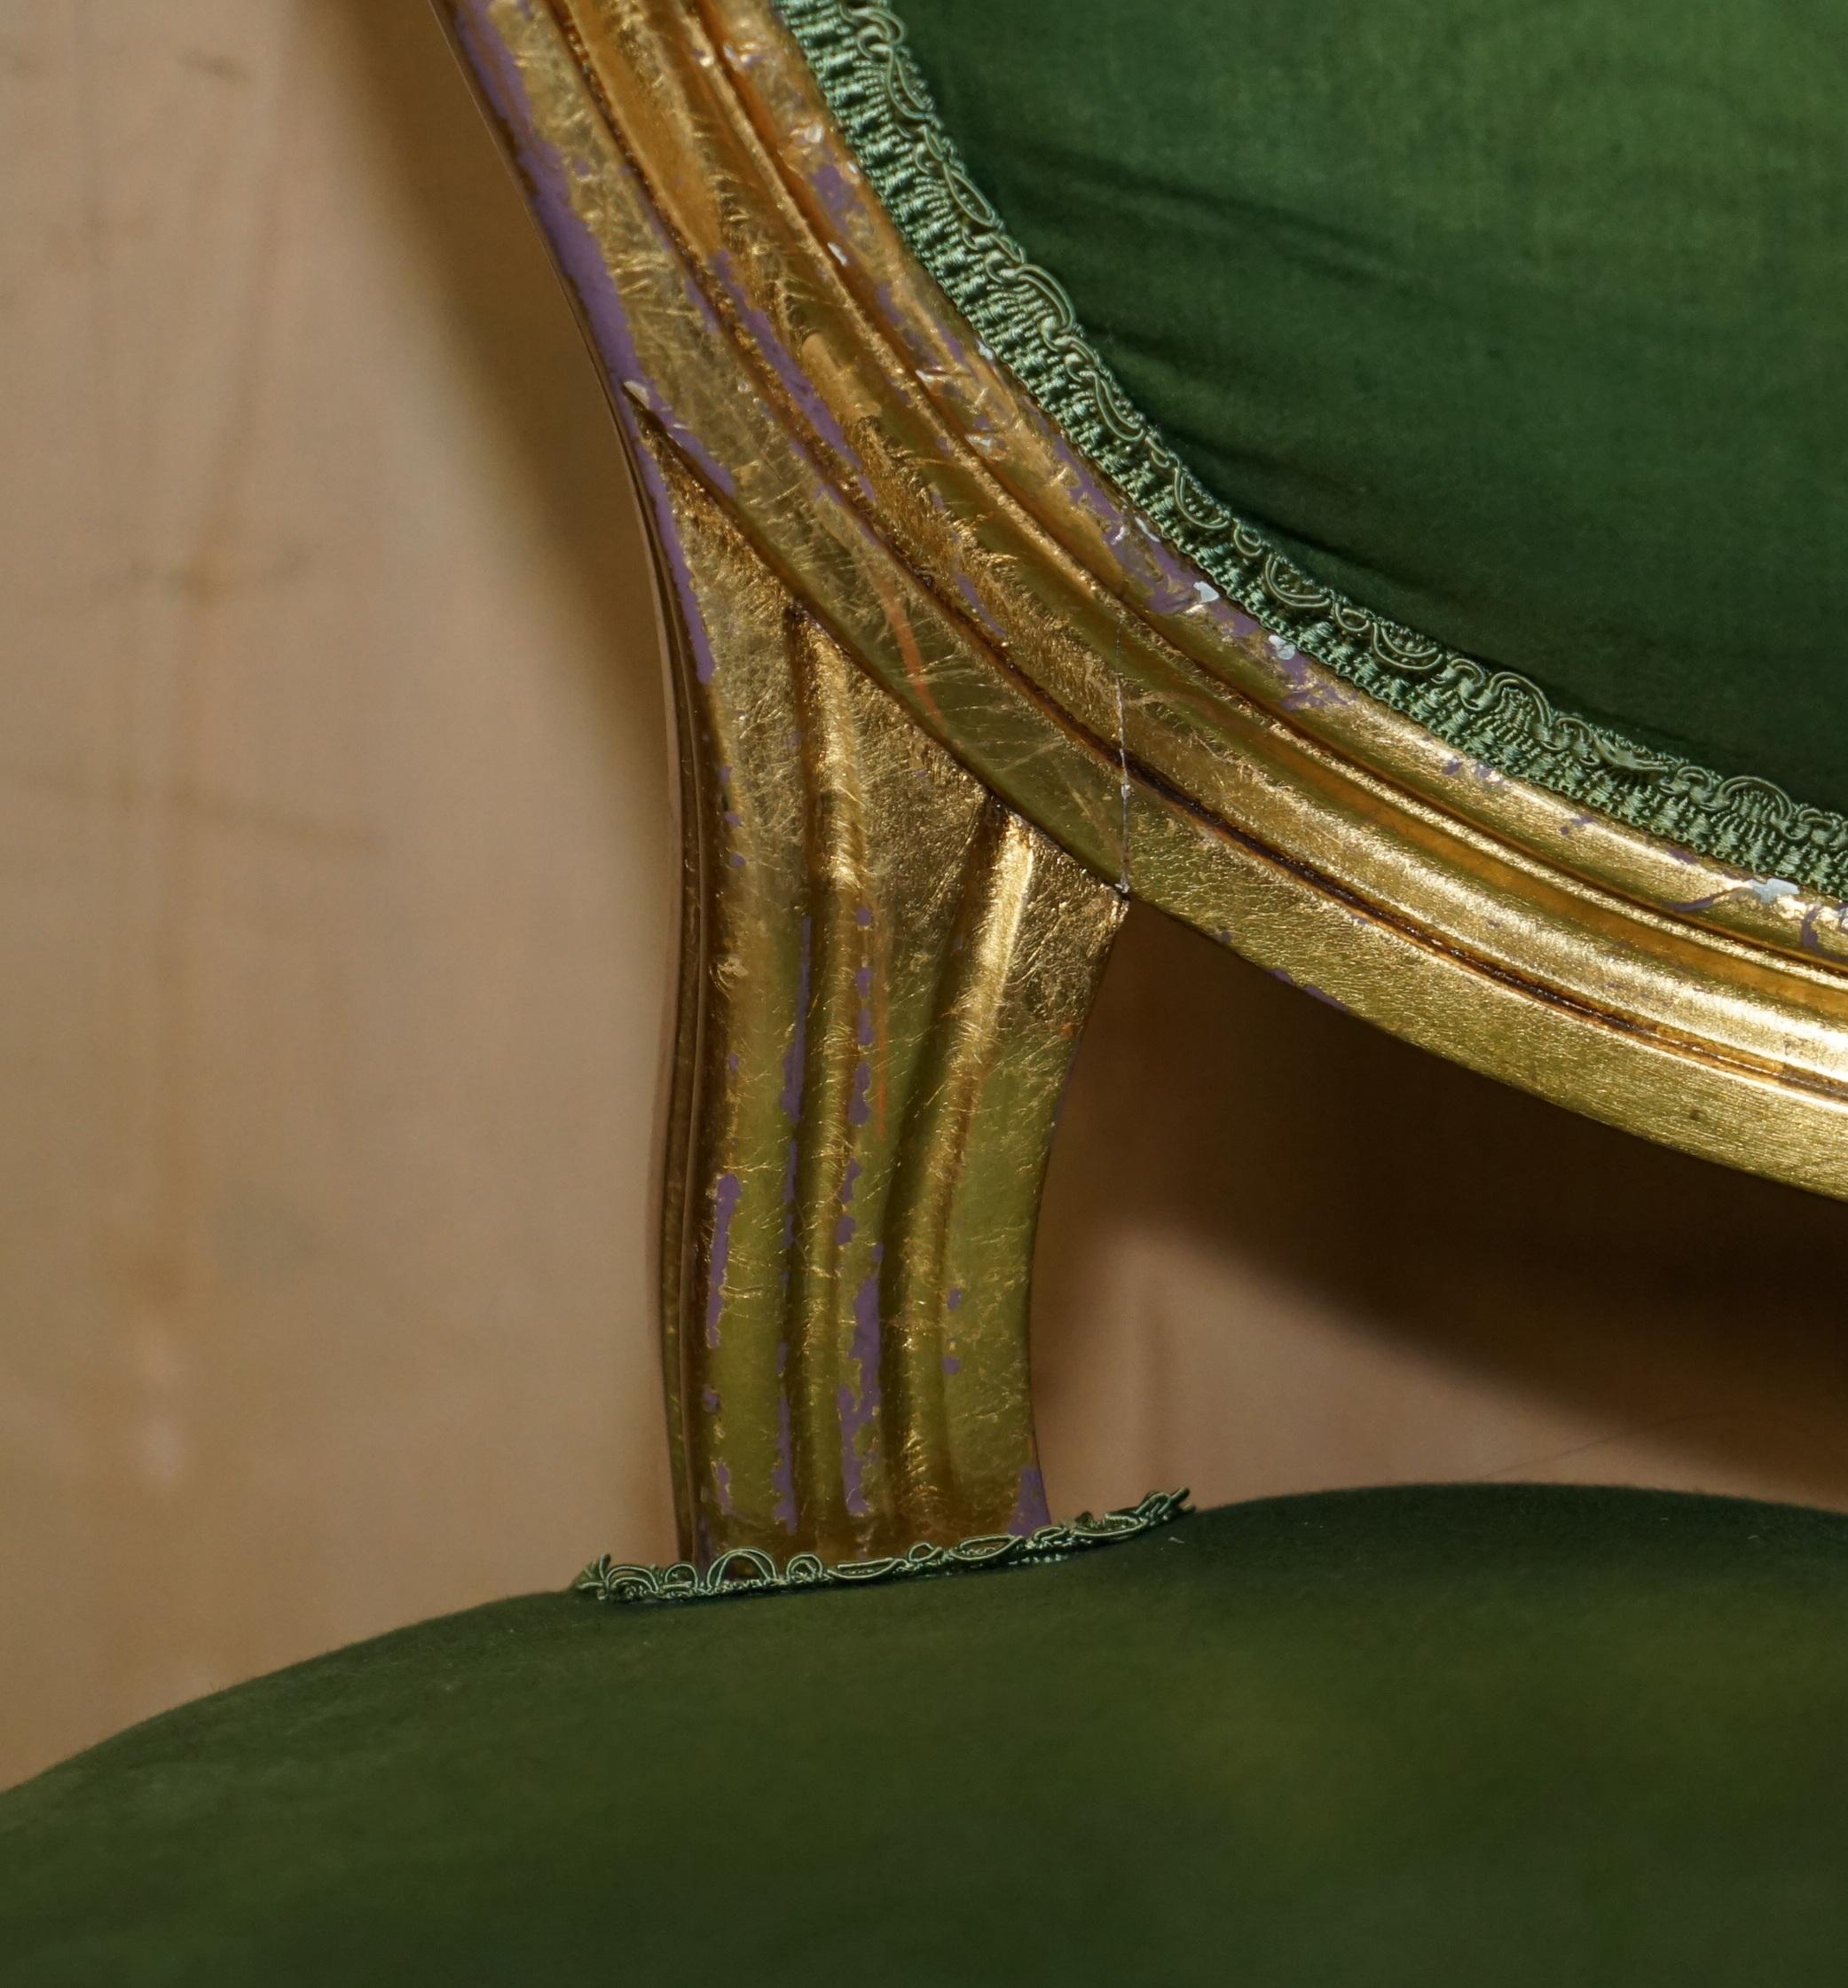 EiGHT ANTIQUE LOUIS XVI  Style DINING CHAIRS FROM LADY DIANA'S SPENCER HOUSE 8 im Angebot 6